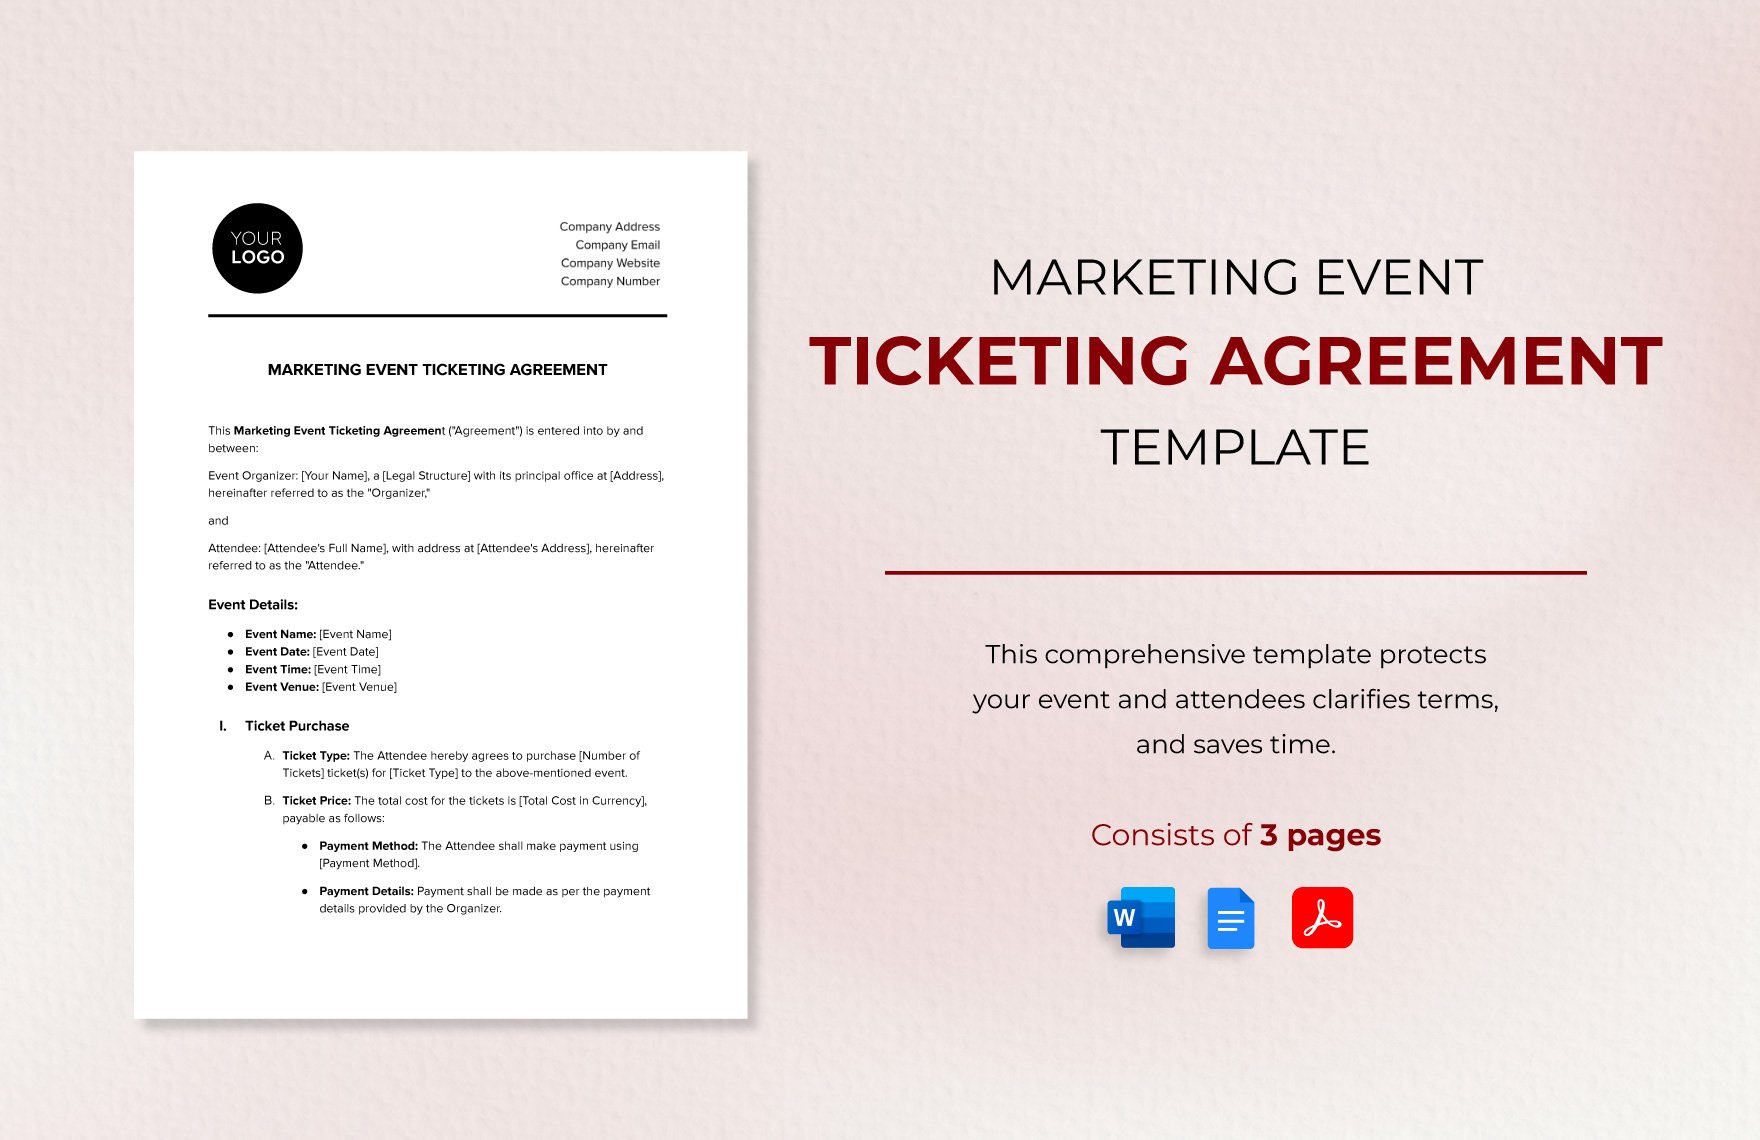 Marketing Event Ticketing Agreement Template in Word, Google Docs, PDF